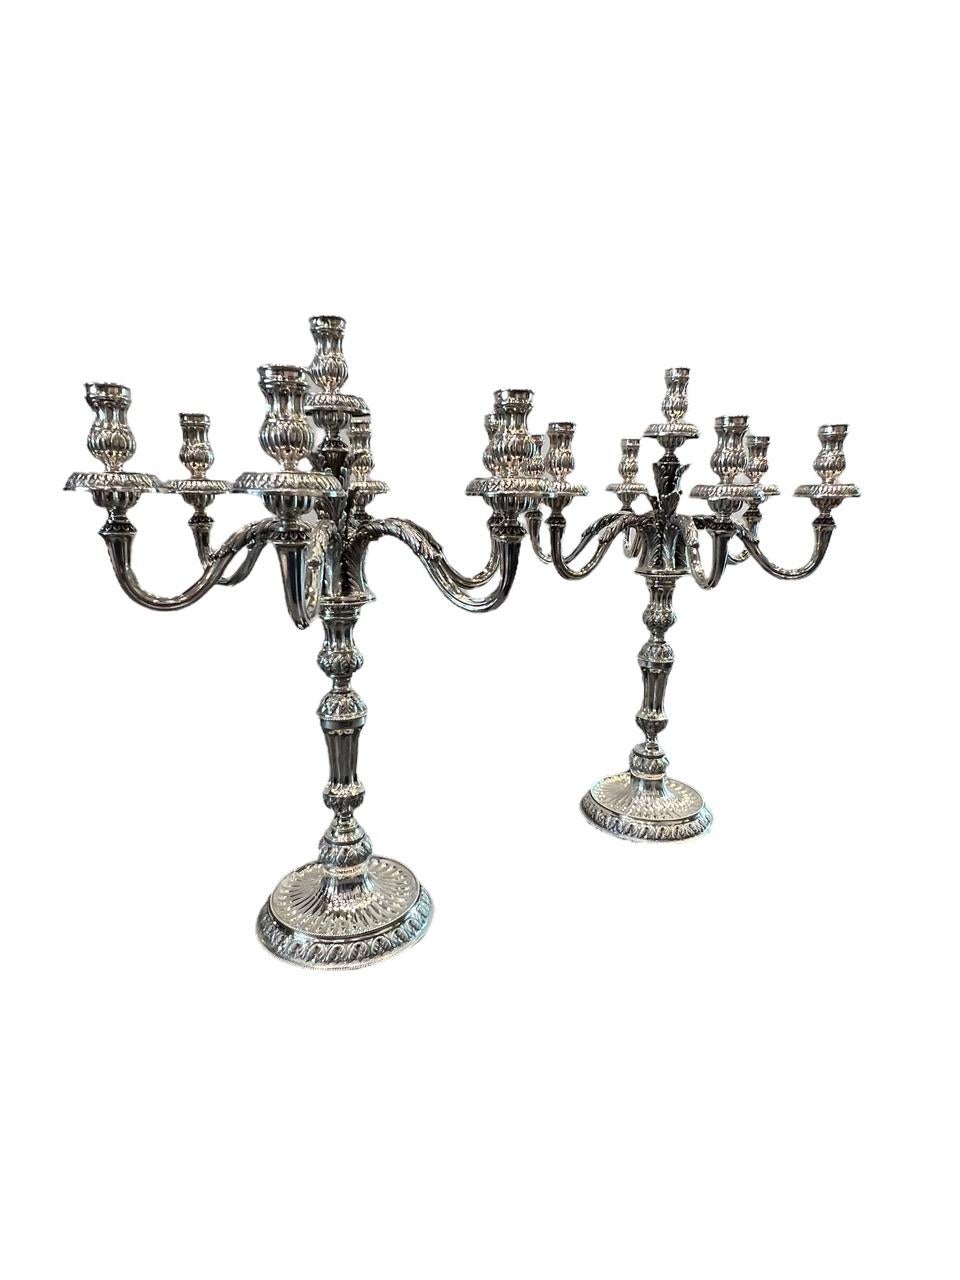 1910 Italian Pair of Sterling Silver Candelabras, Tall and Heavy 2